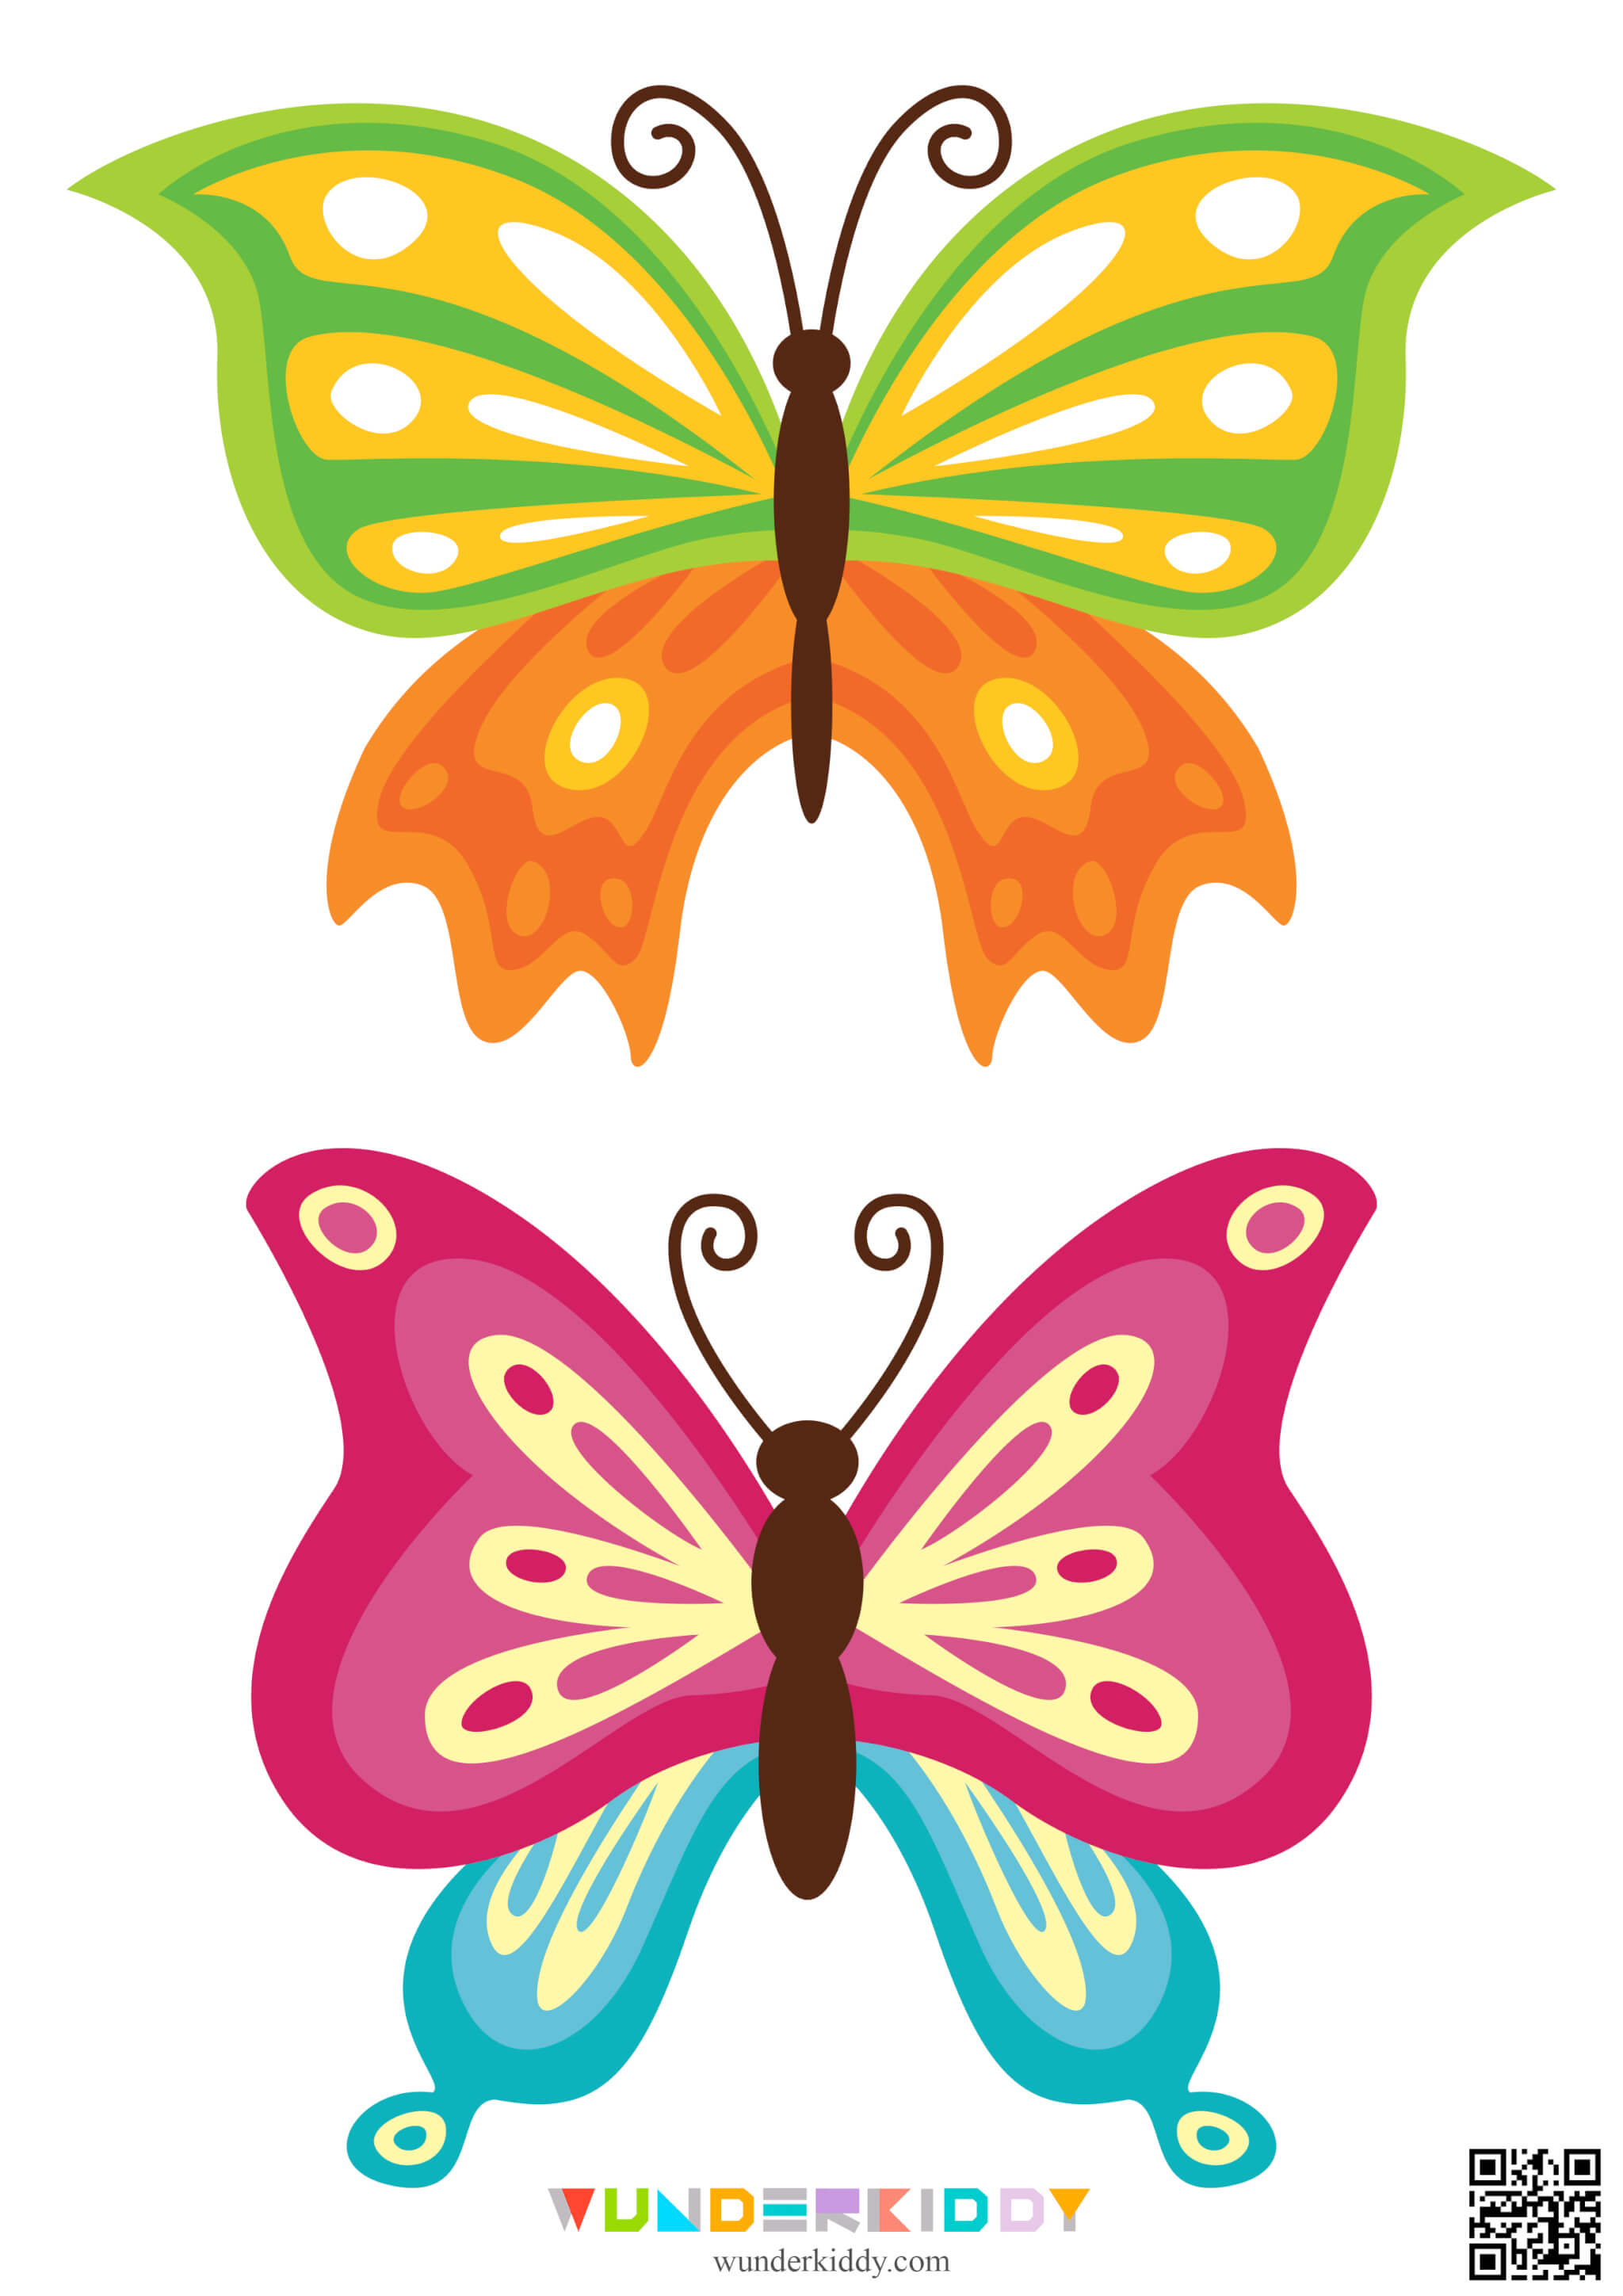 Template «Butterfly» - Image 6